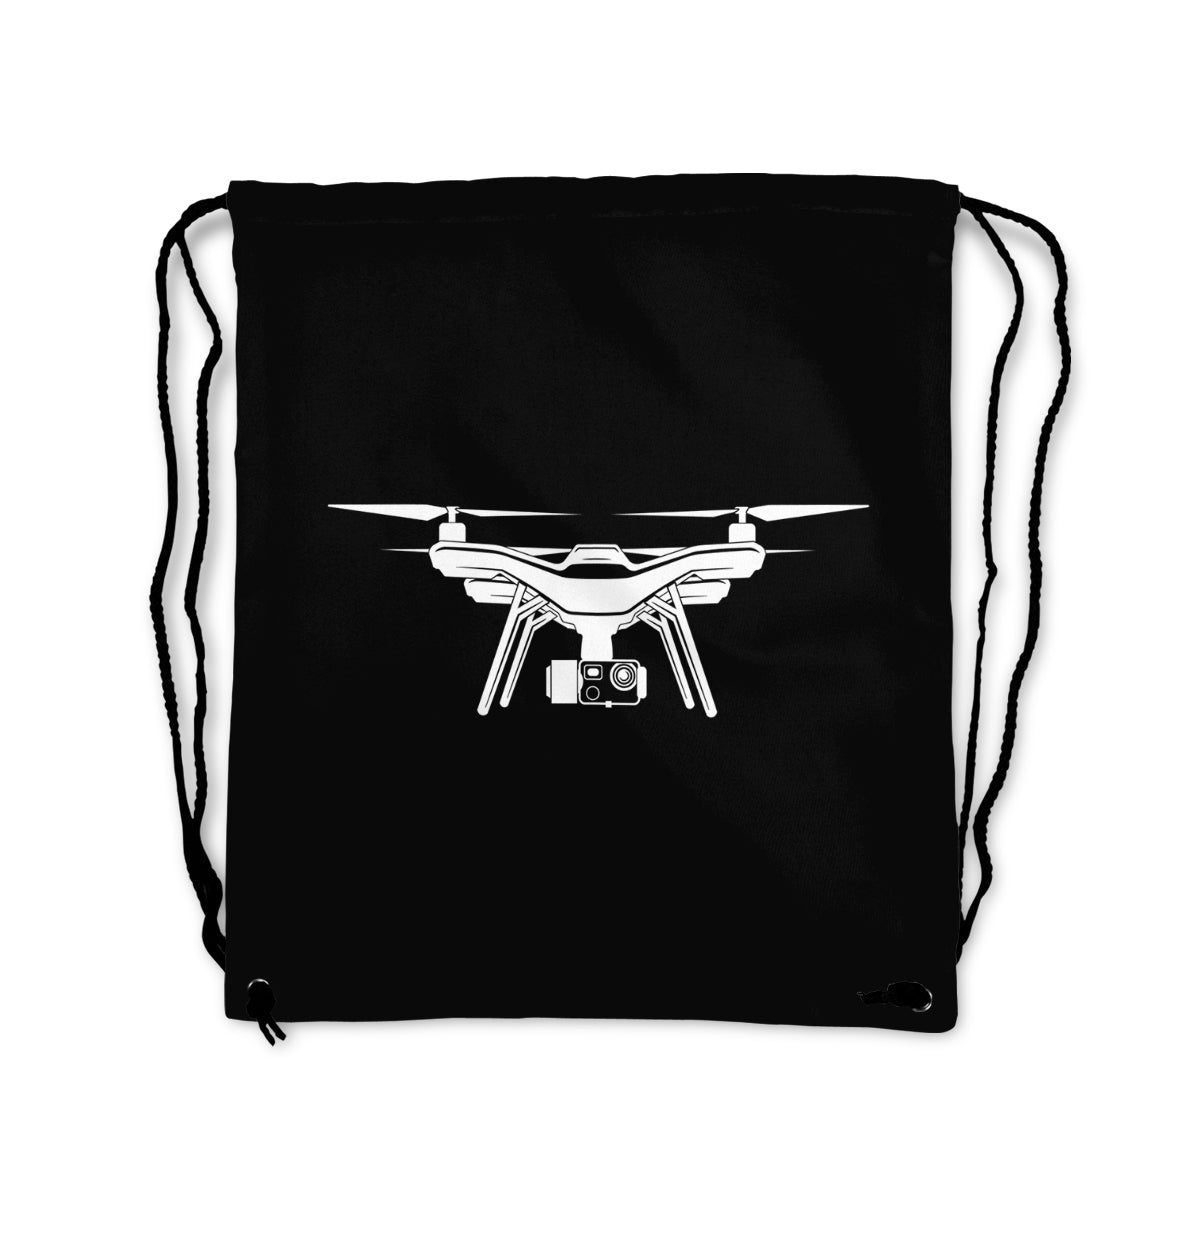 Drone Silhouette Designed Drawstring Bags